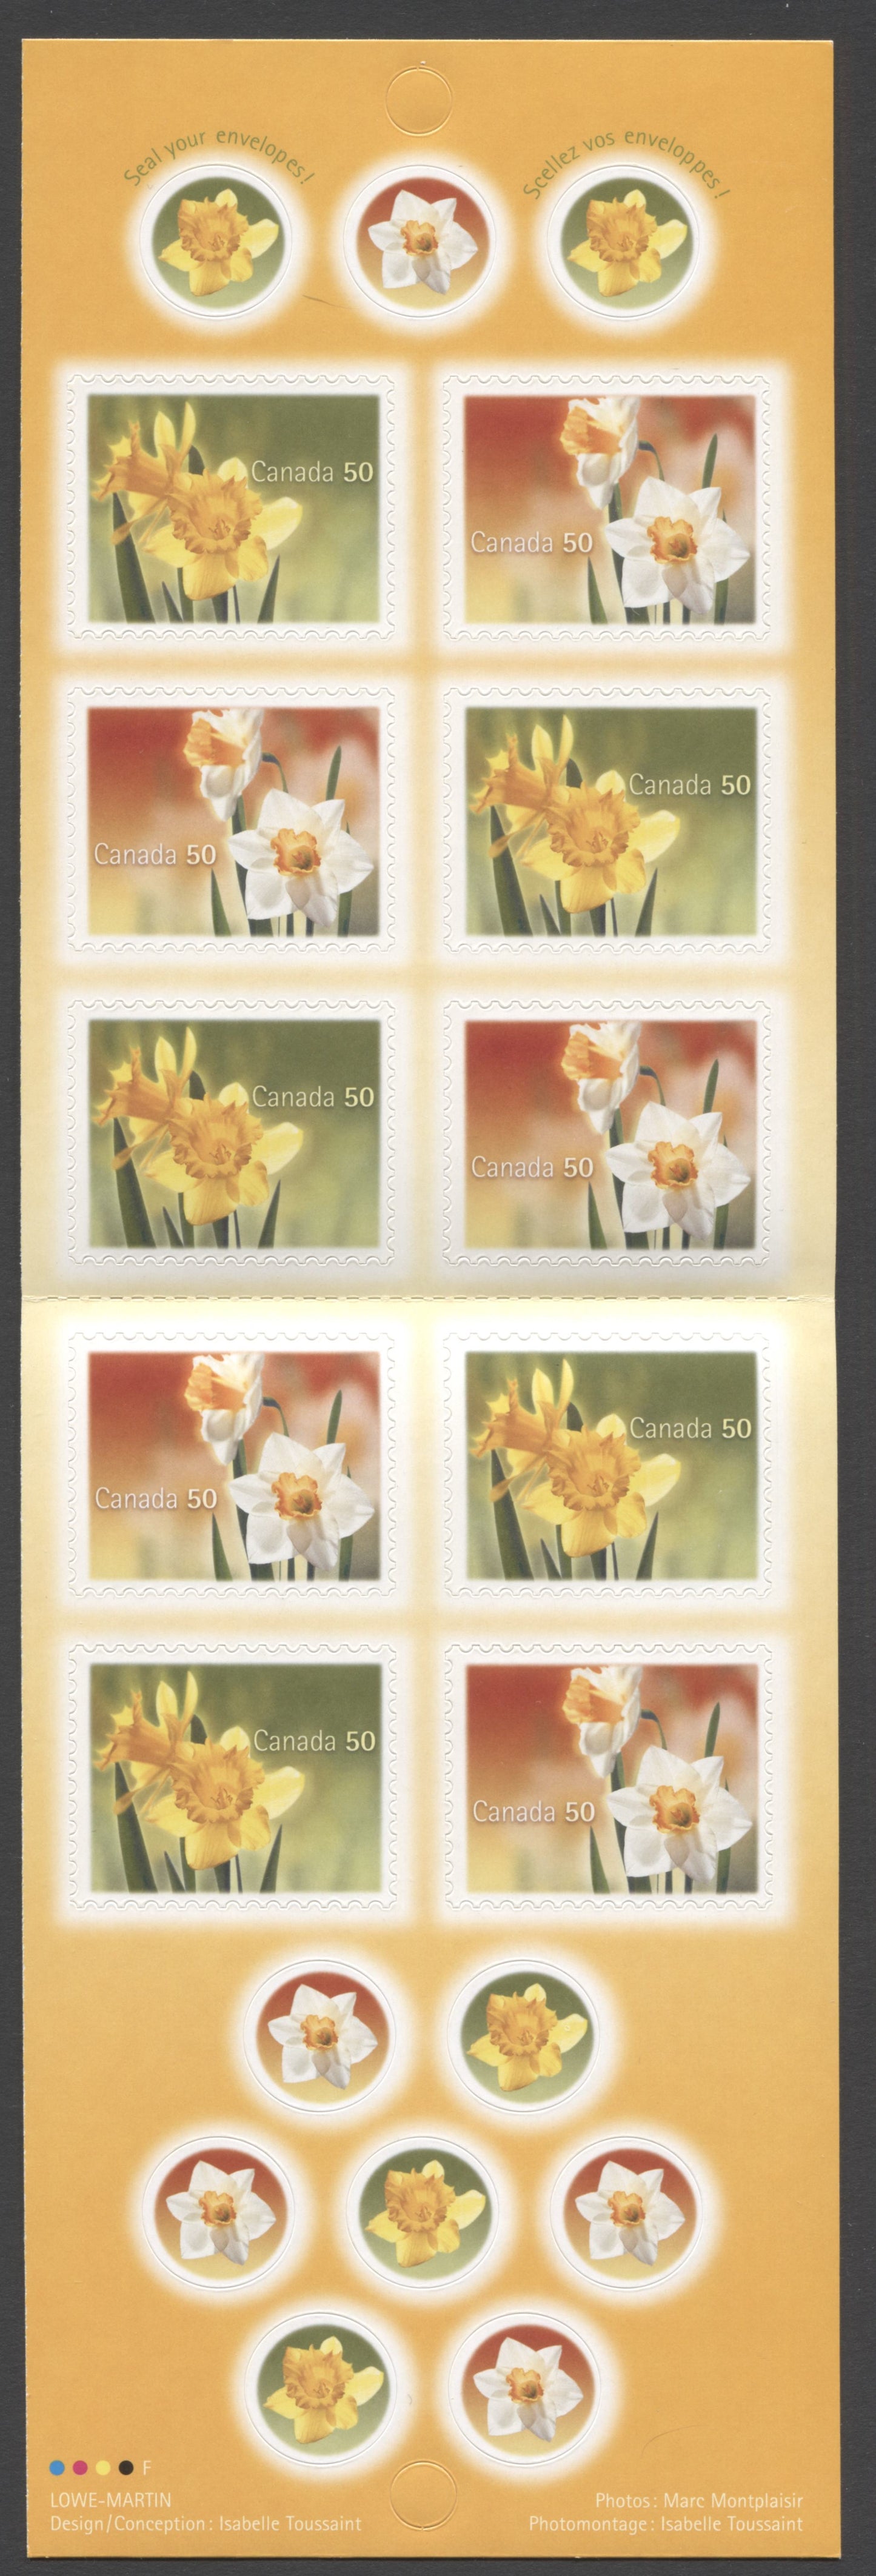 Canada #BK308 2005 Daffodils Issue, Complete $5 Booklet, Fasson Paper, Dead Paper, 4 mm GT-4 Tagging